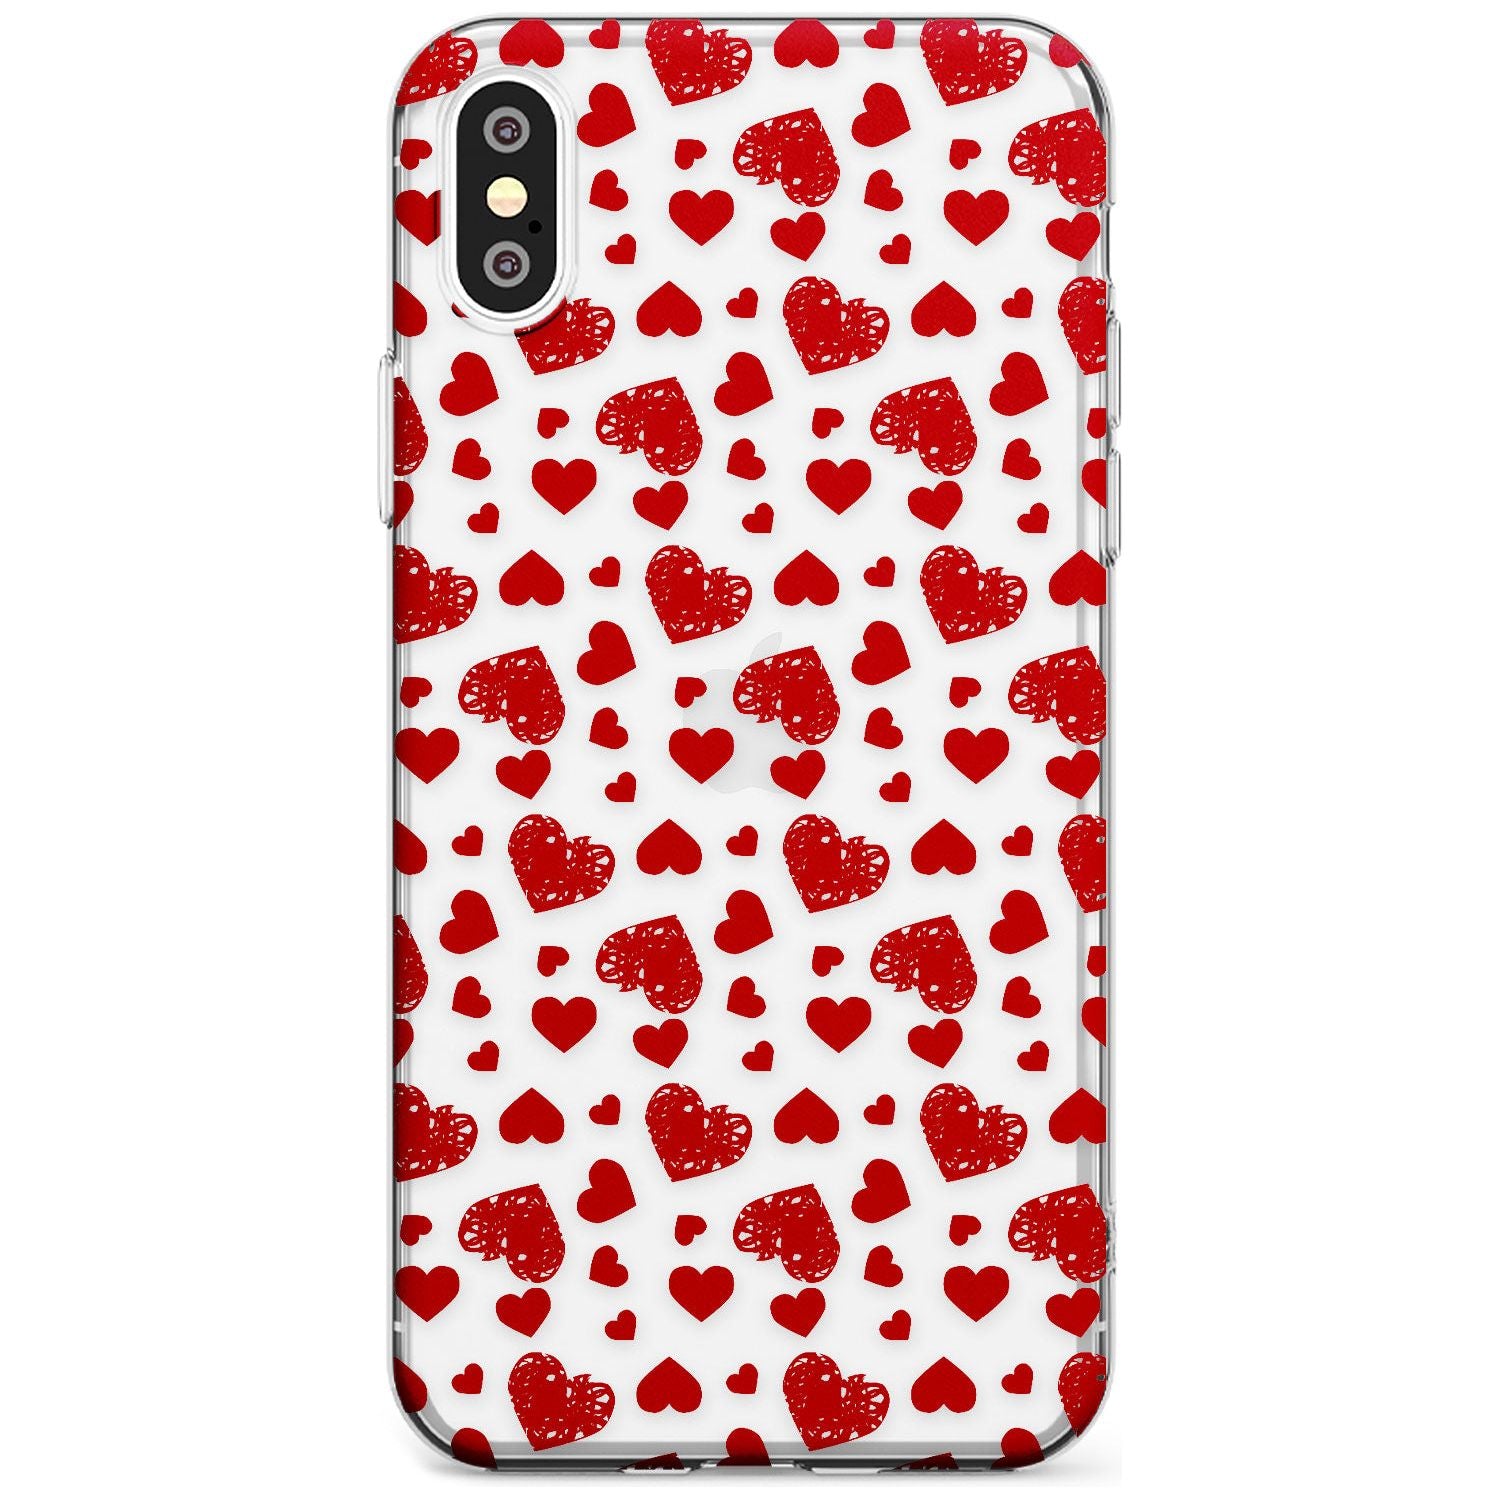 Sketched Heart Pattern Black Impact Phone Case for iPhone X XS Max XR